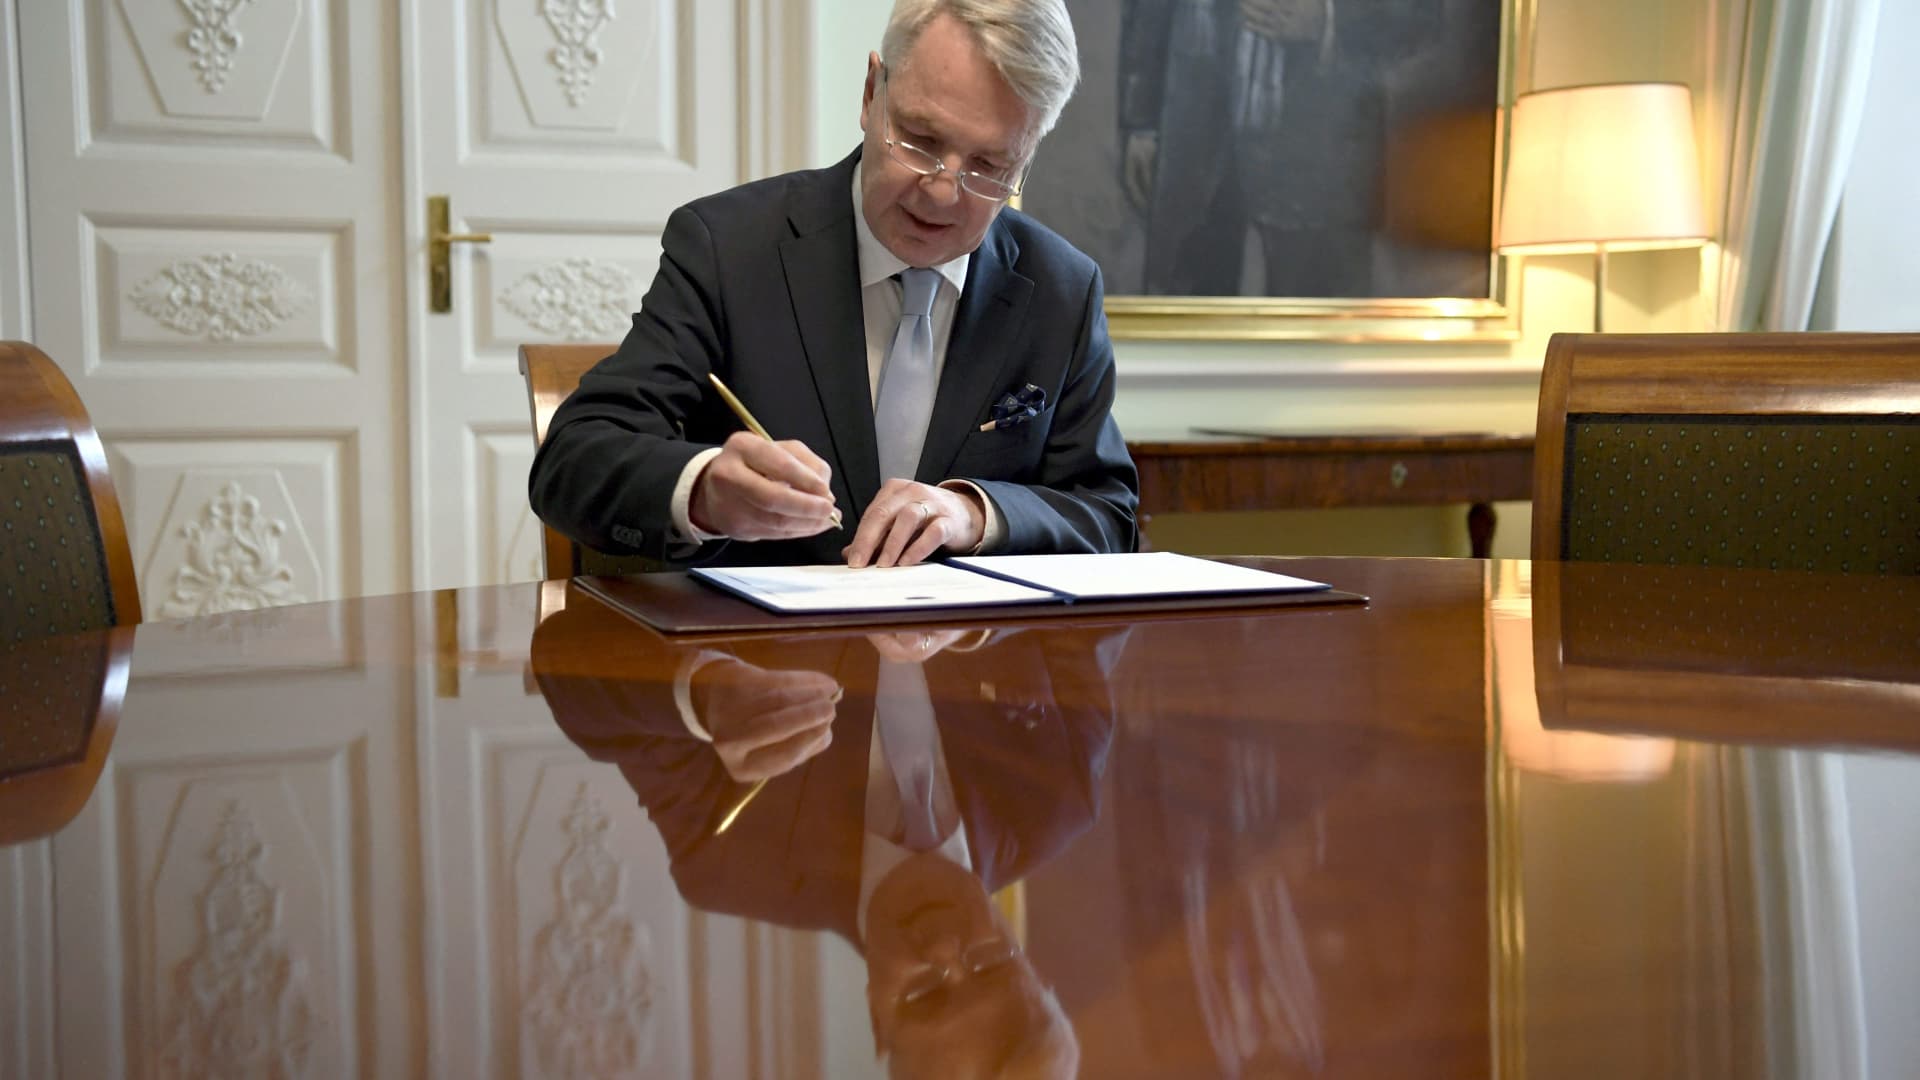 Finnish Foreign Minister Pekka Haavisto signs a petition for NATO membership in Helsinki on May 17, 2022. Turkish President Recep Tayyip Erdogan has said he opposes the Finland and Sweden joining NATO.